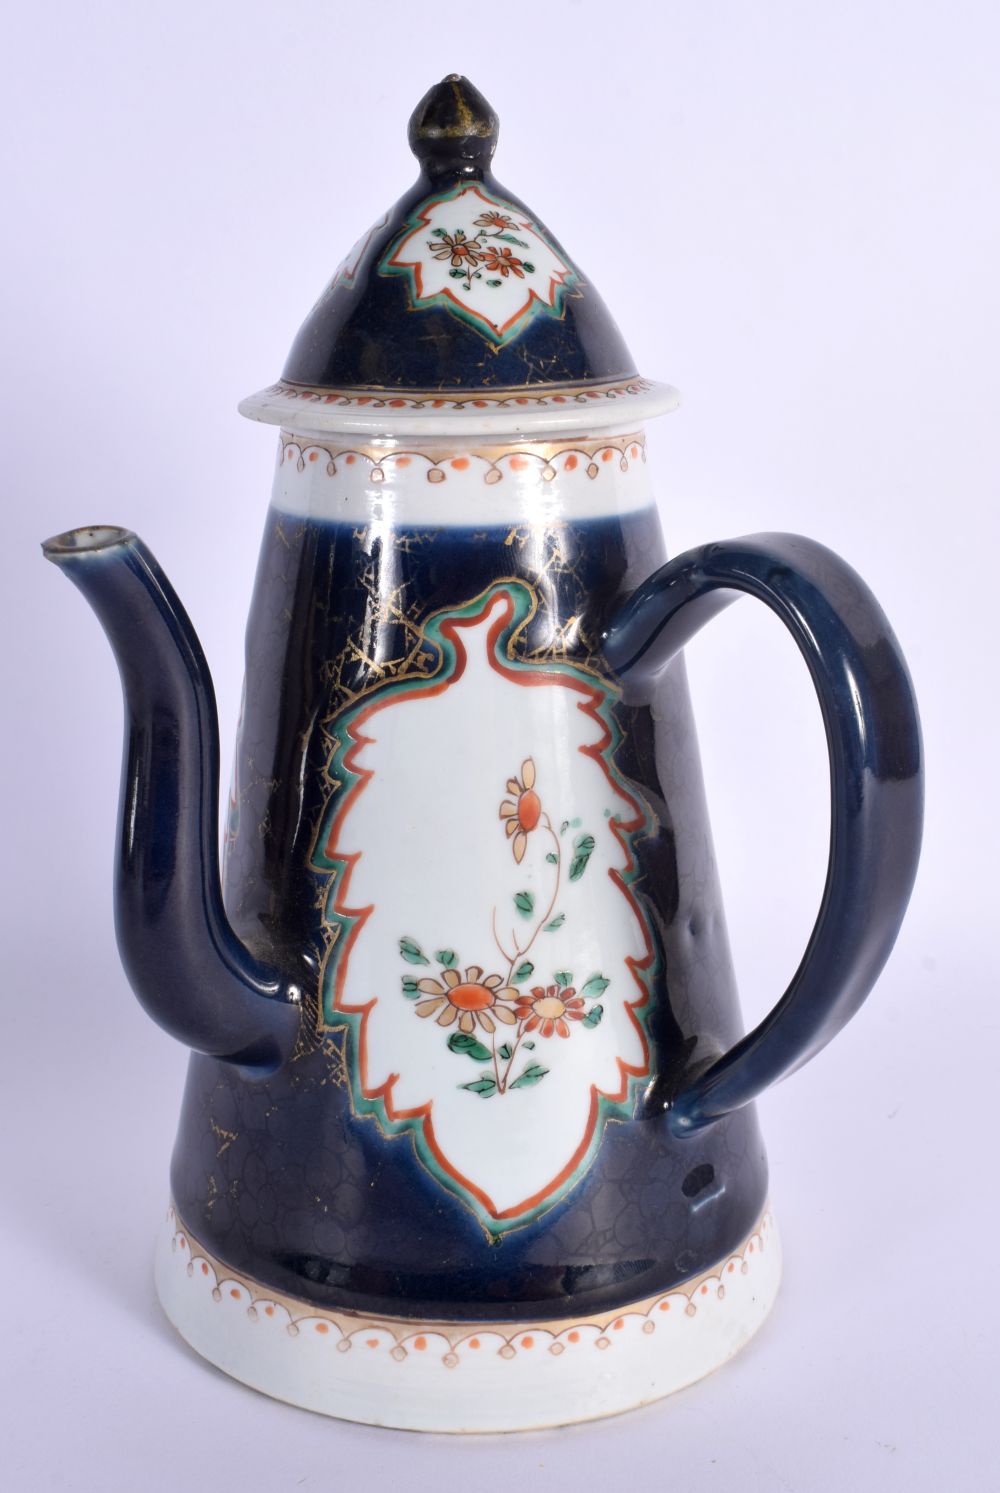 AN EARLY 18TH CENTURY JAPANESE EDO PERIOD BLUE SCALE CHOCOLATE POT AND COVER painted with panels of